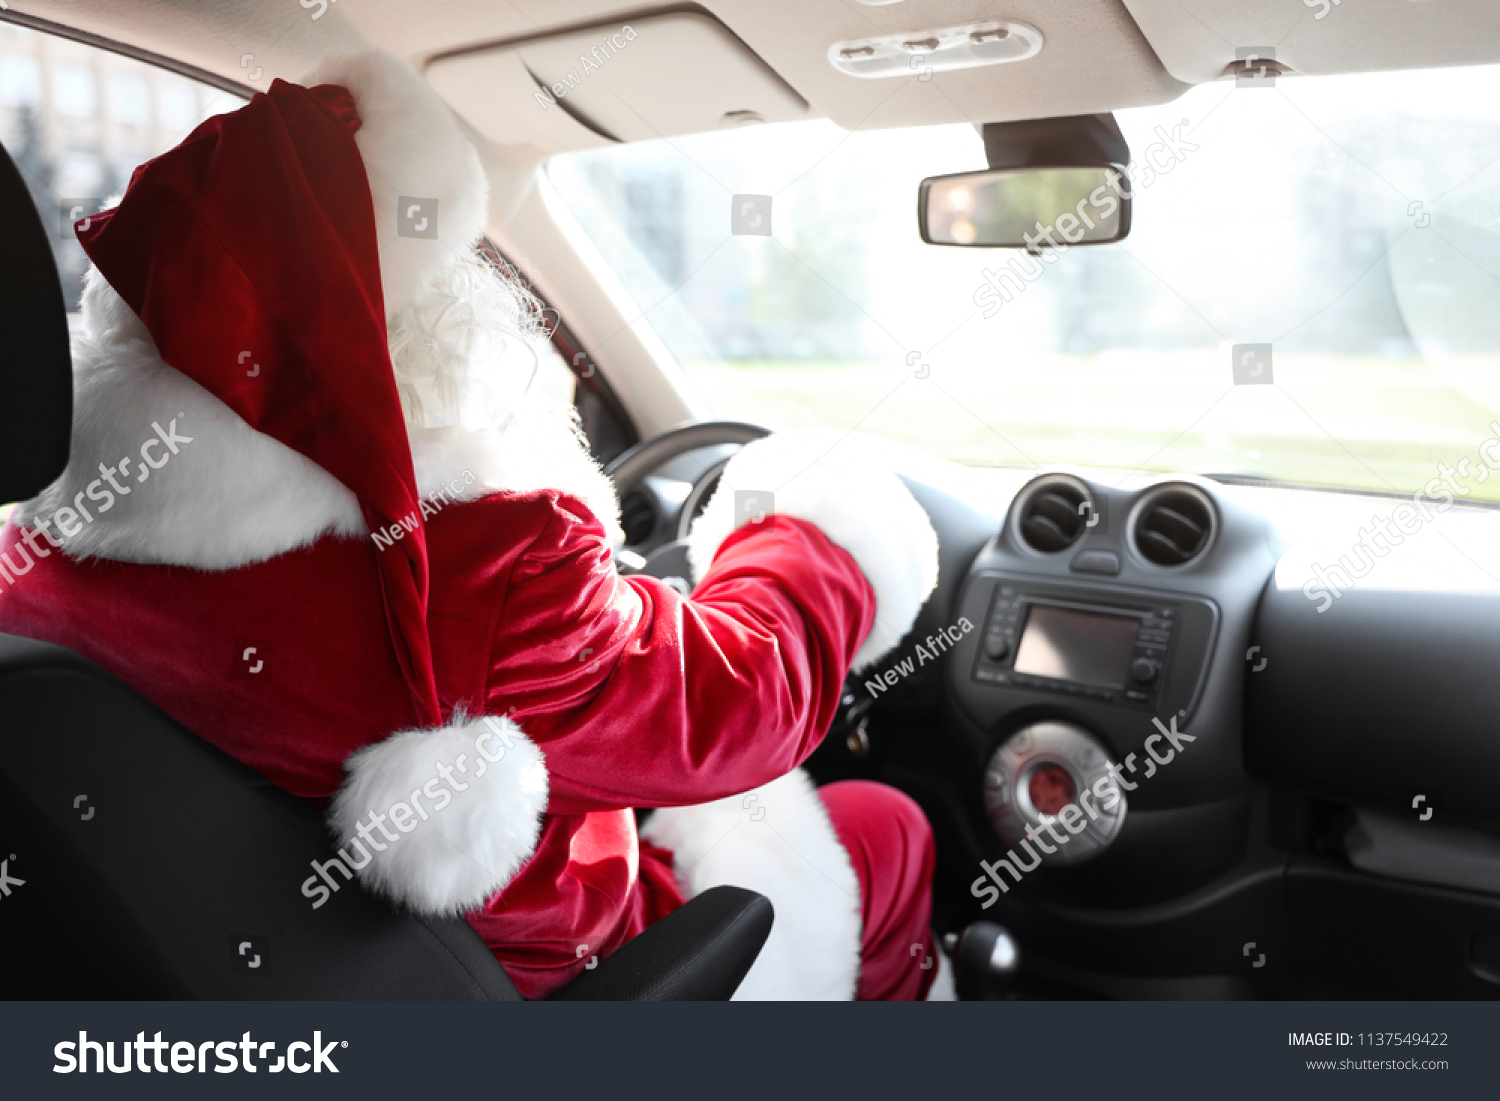 Authentic Santa Claus driving car, view from inside #1137549422